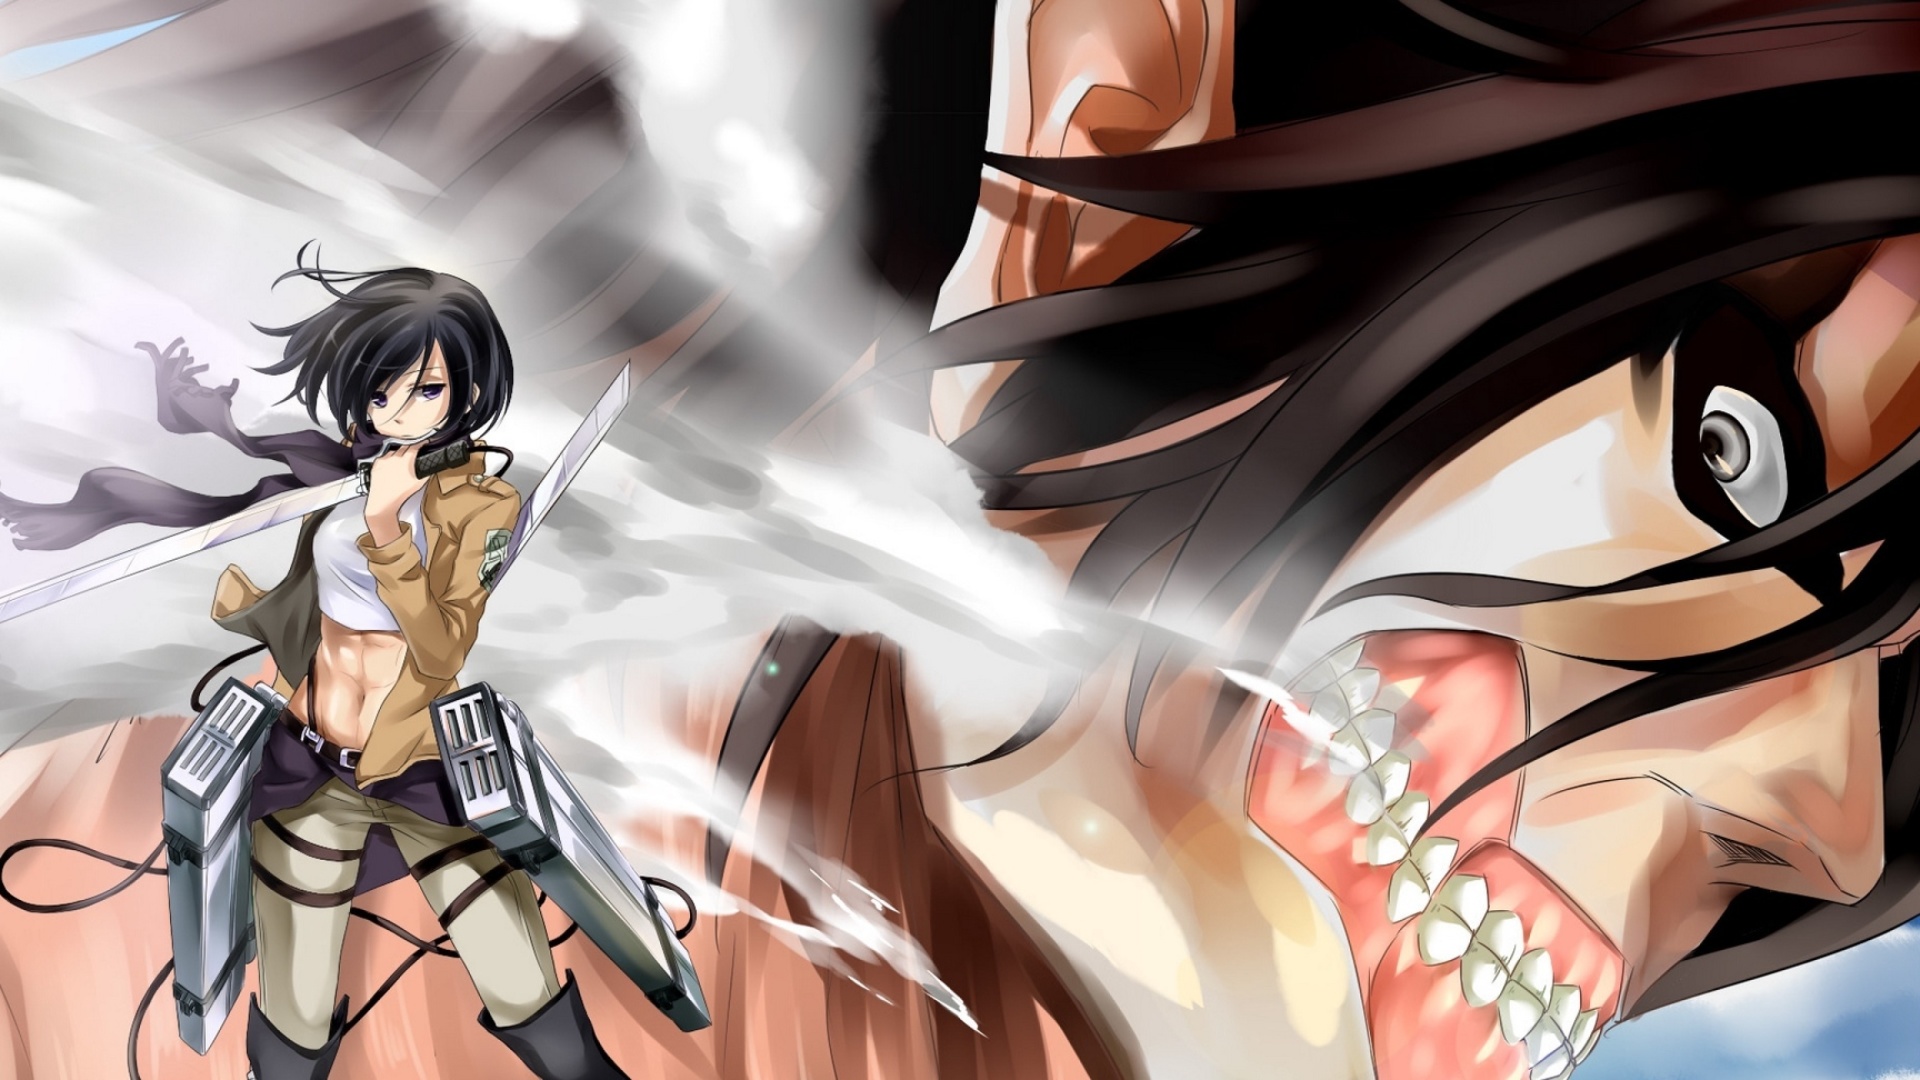 Attack on Titan with Eren and Mikasa screenshot #1 1920x1080